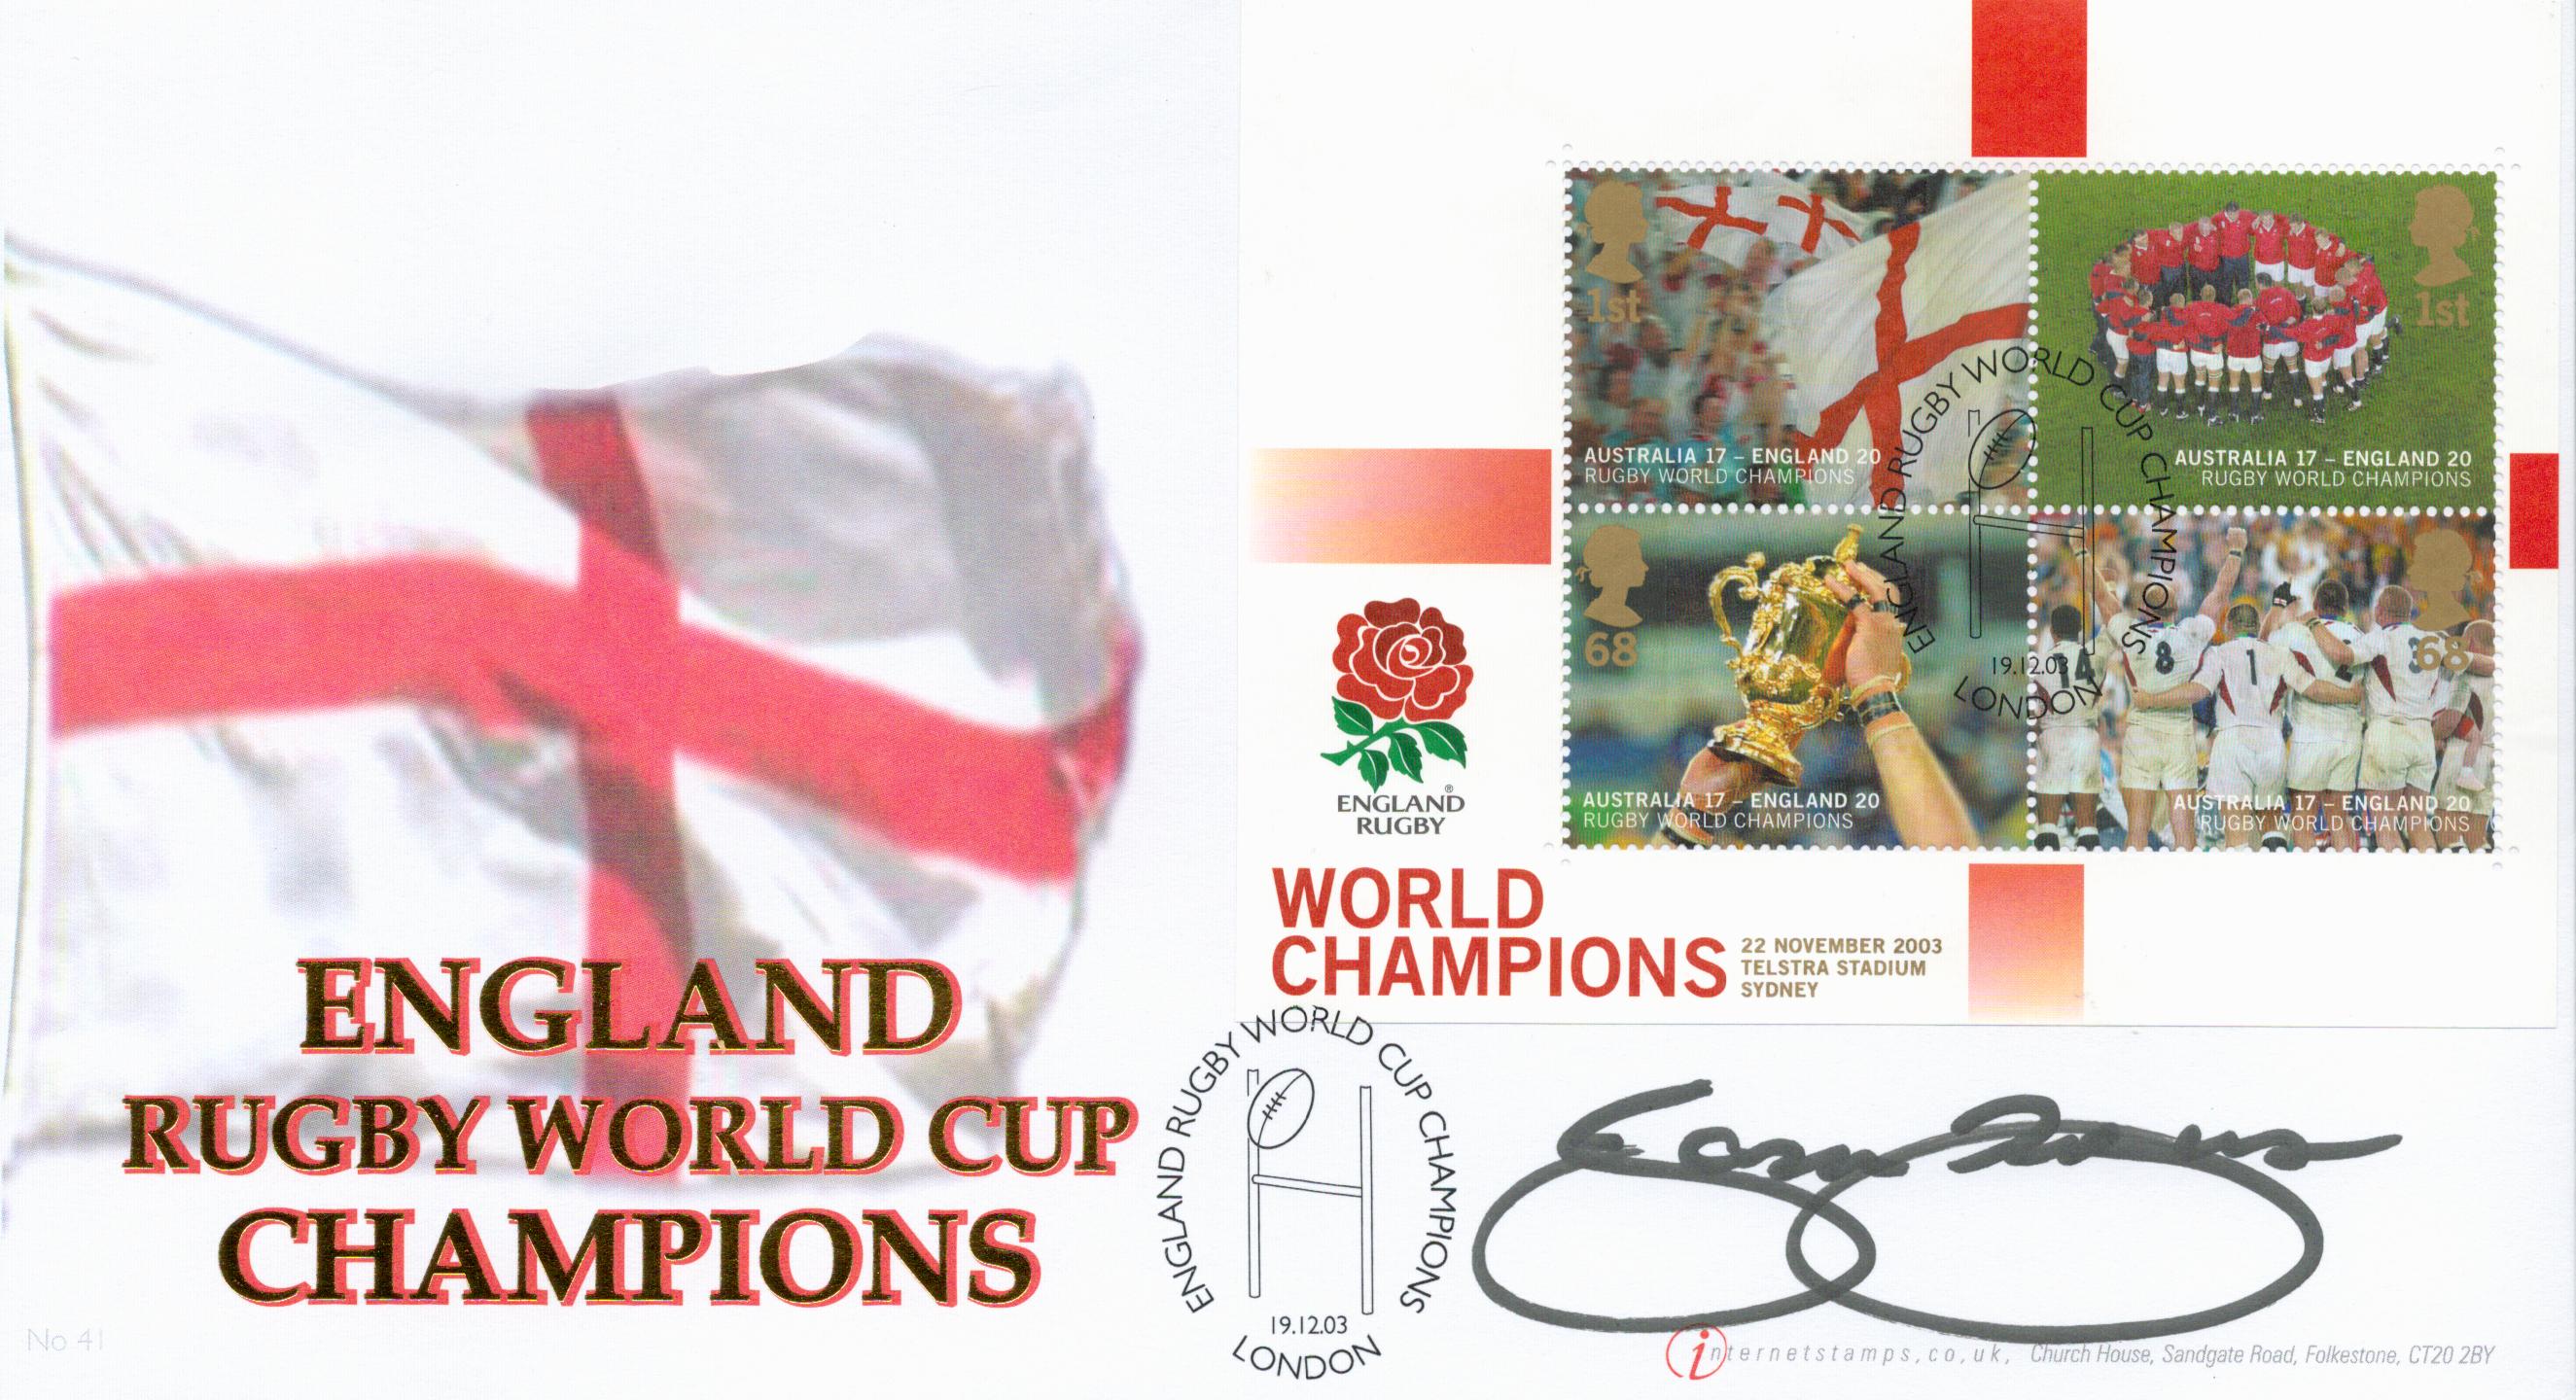 Rugby Jason Robinson signed England Rugby World Cup Champions FDC PM England Rugby World Cup